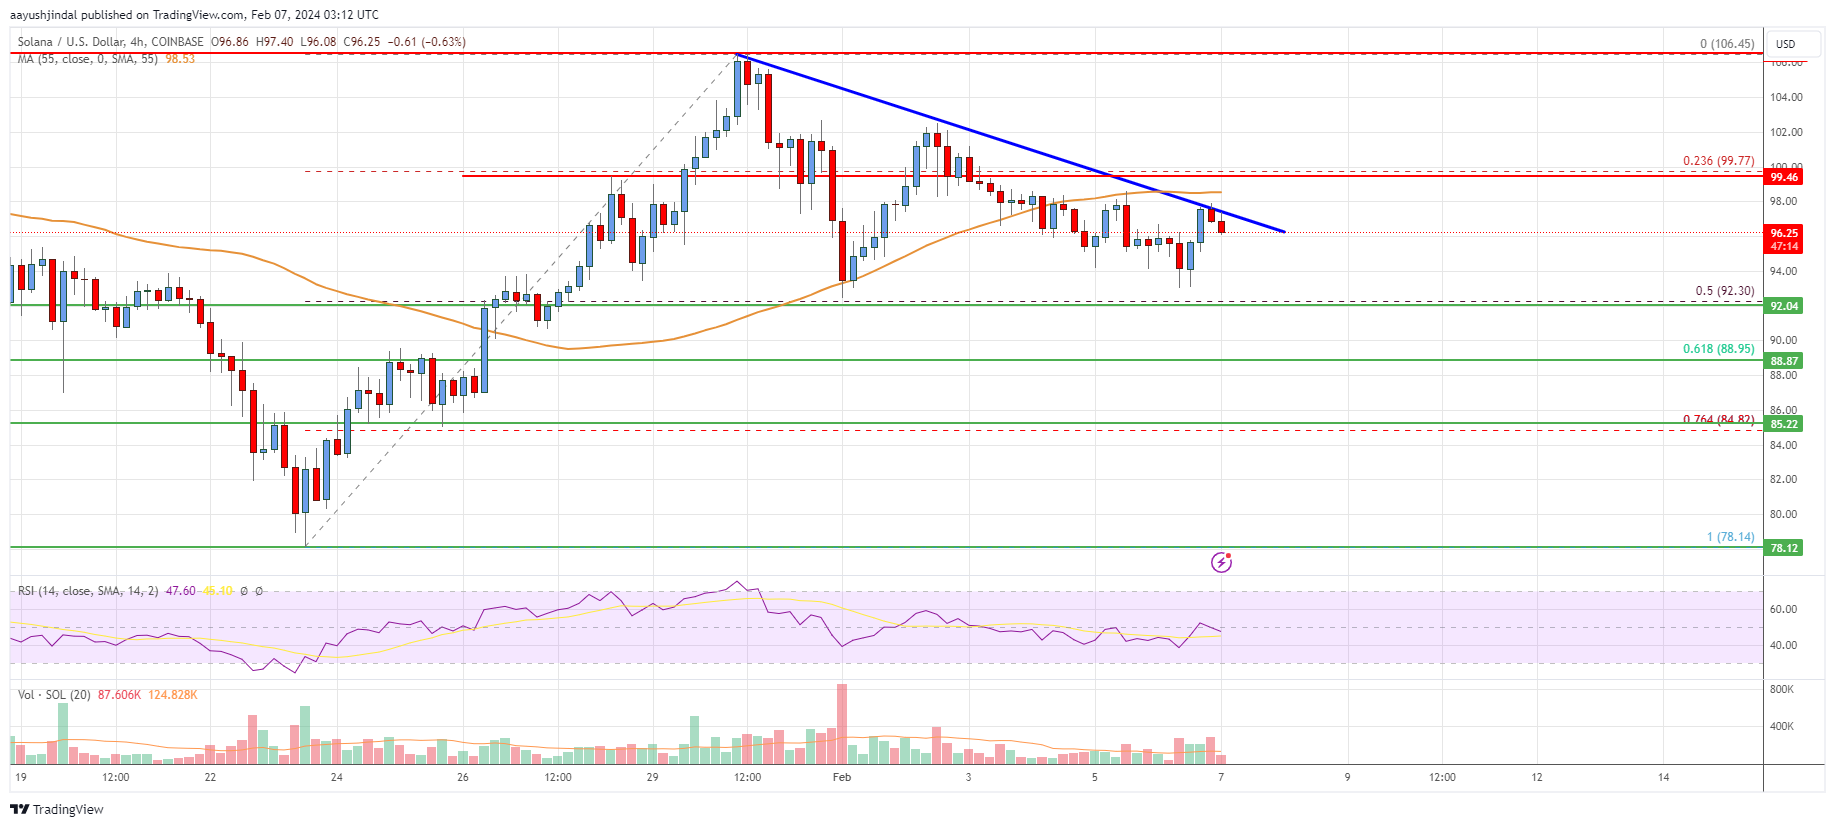 Solana (SOL) Price Analysis: Key Uptrend Support Intact At $92